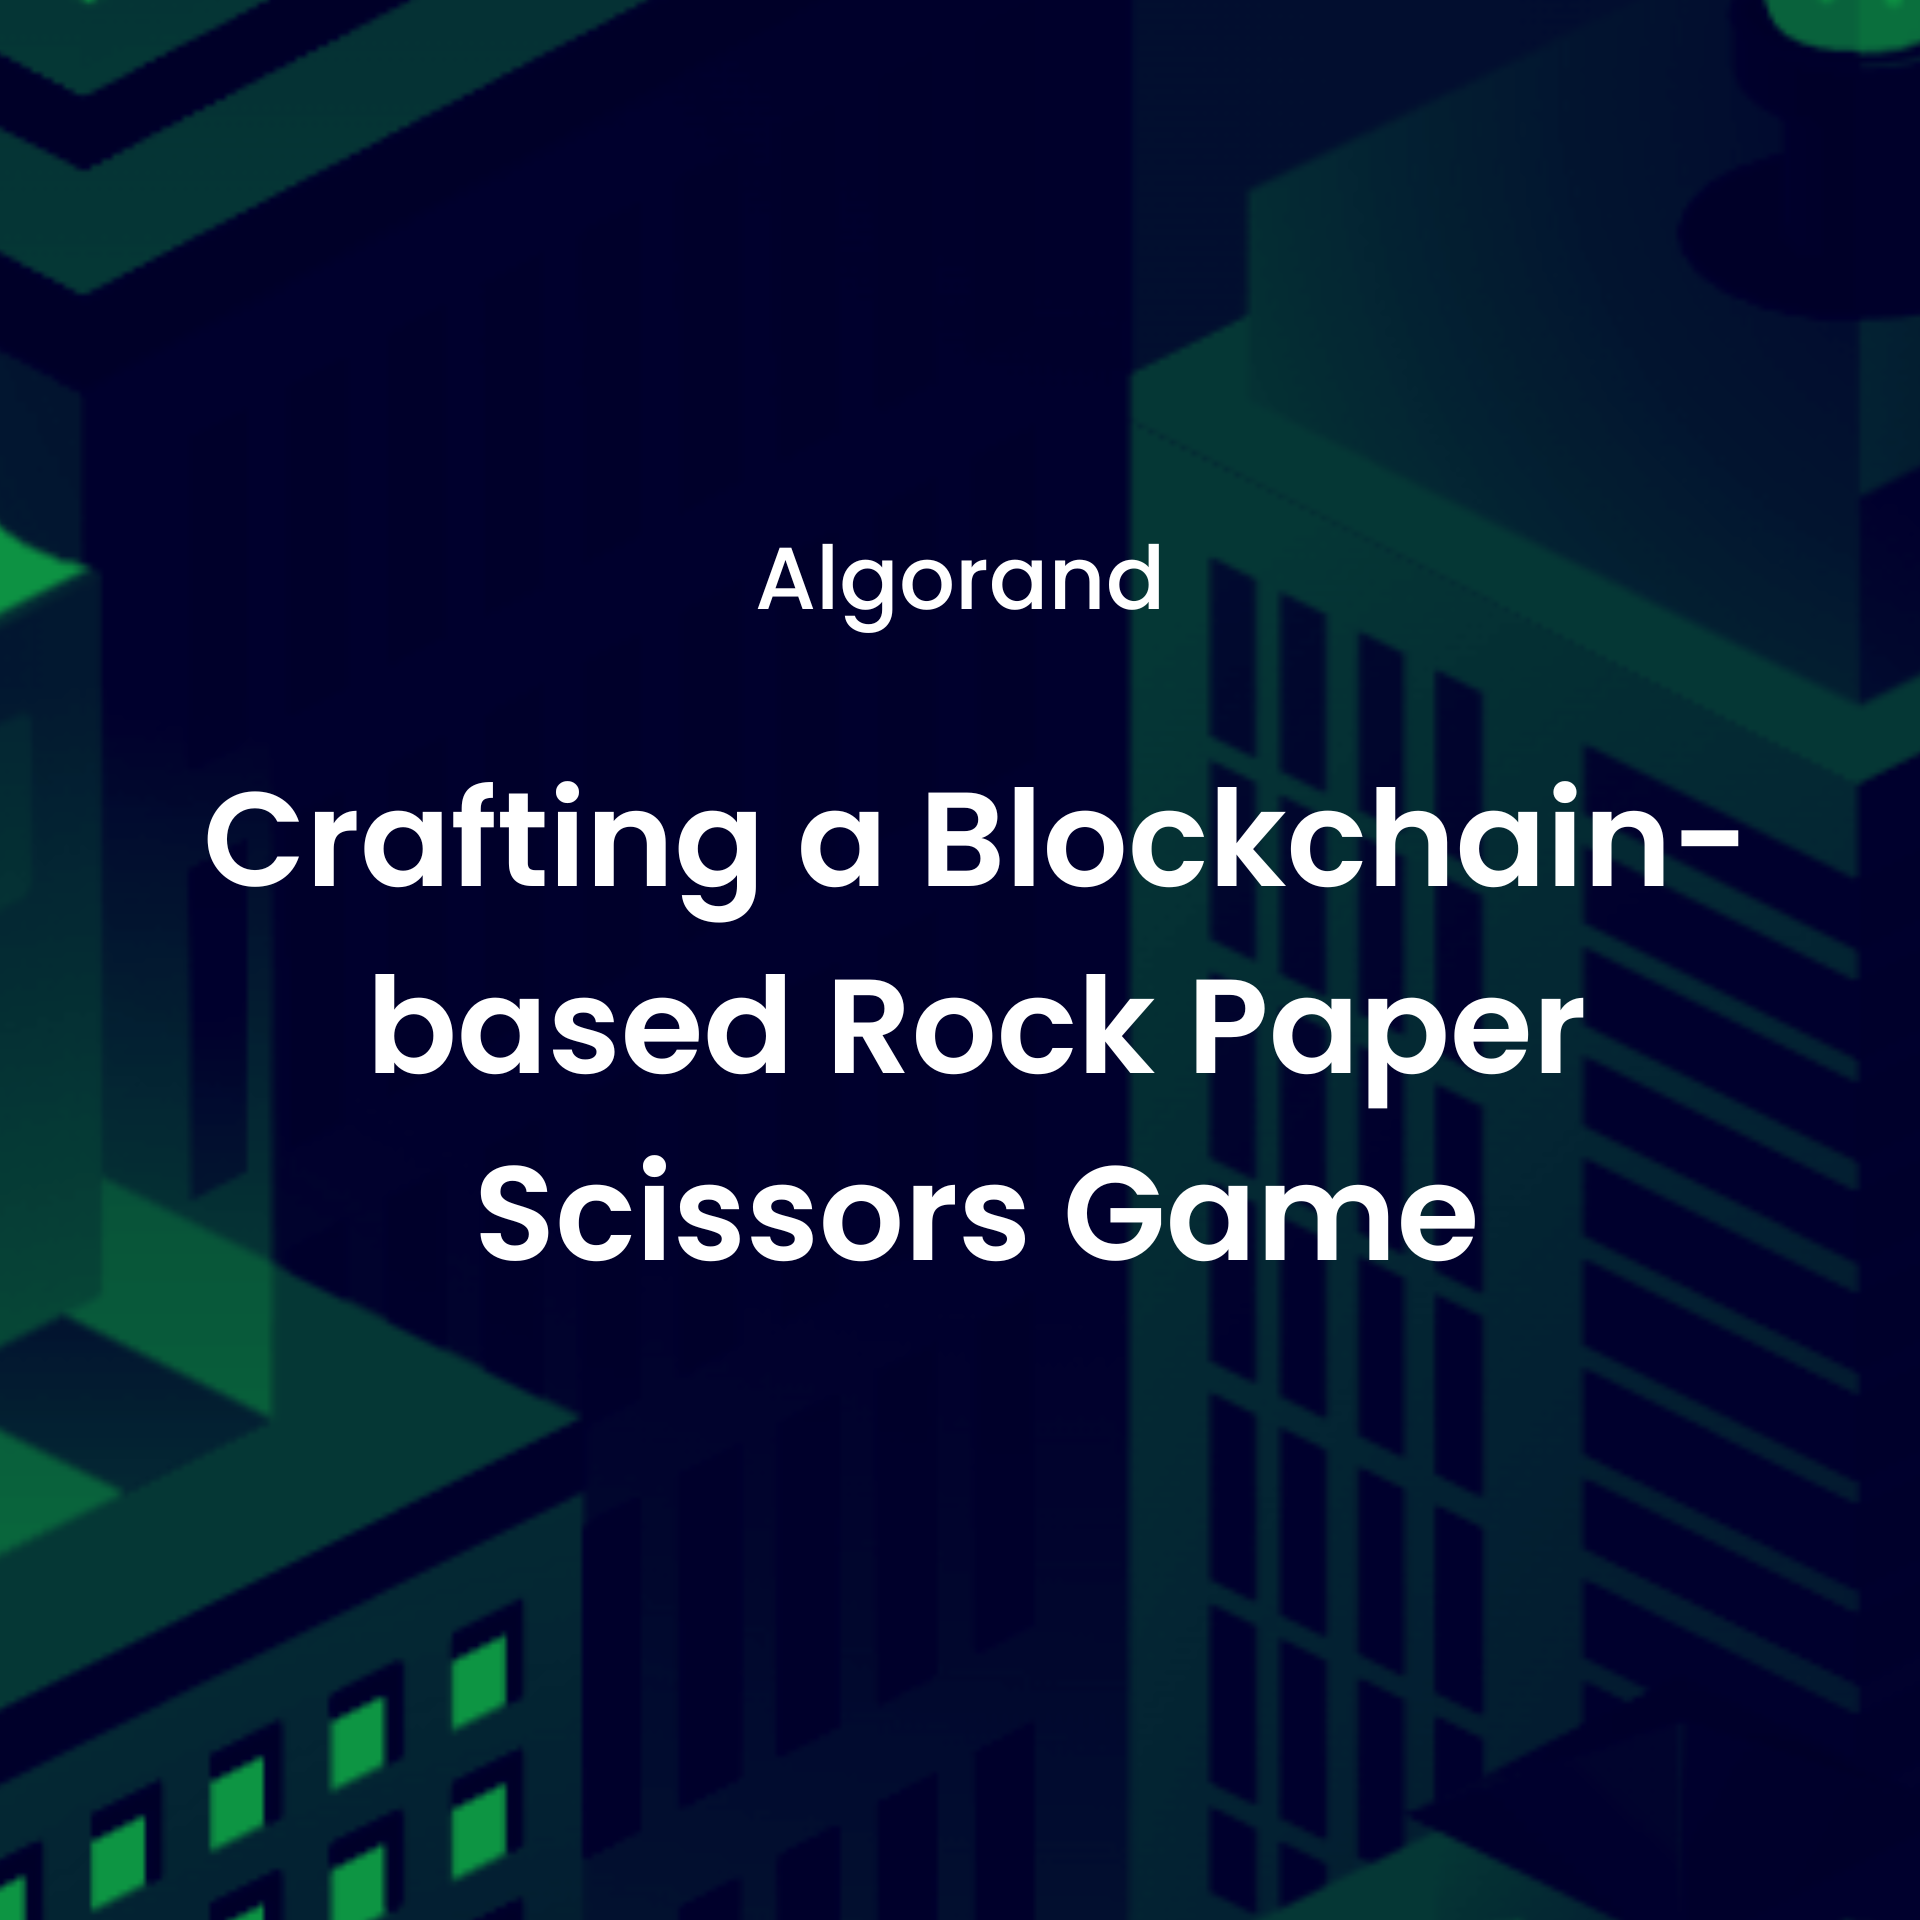 Crafting a Blockchain-based Rock Paper Scissors Game